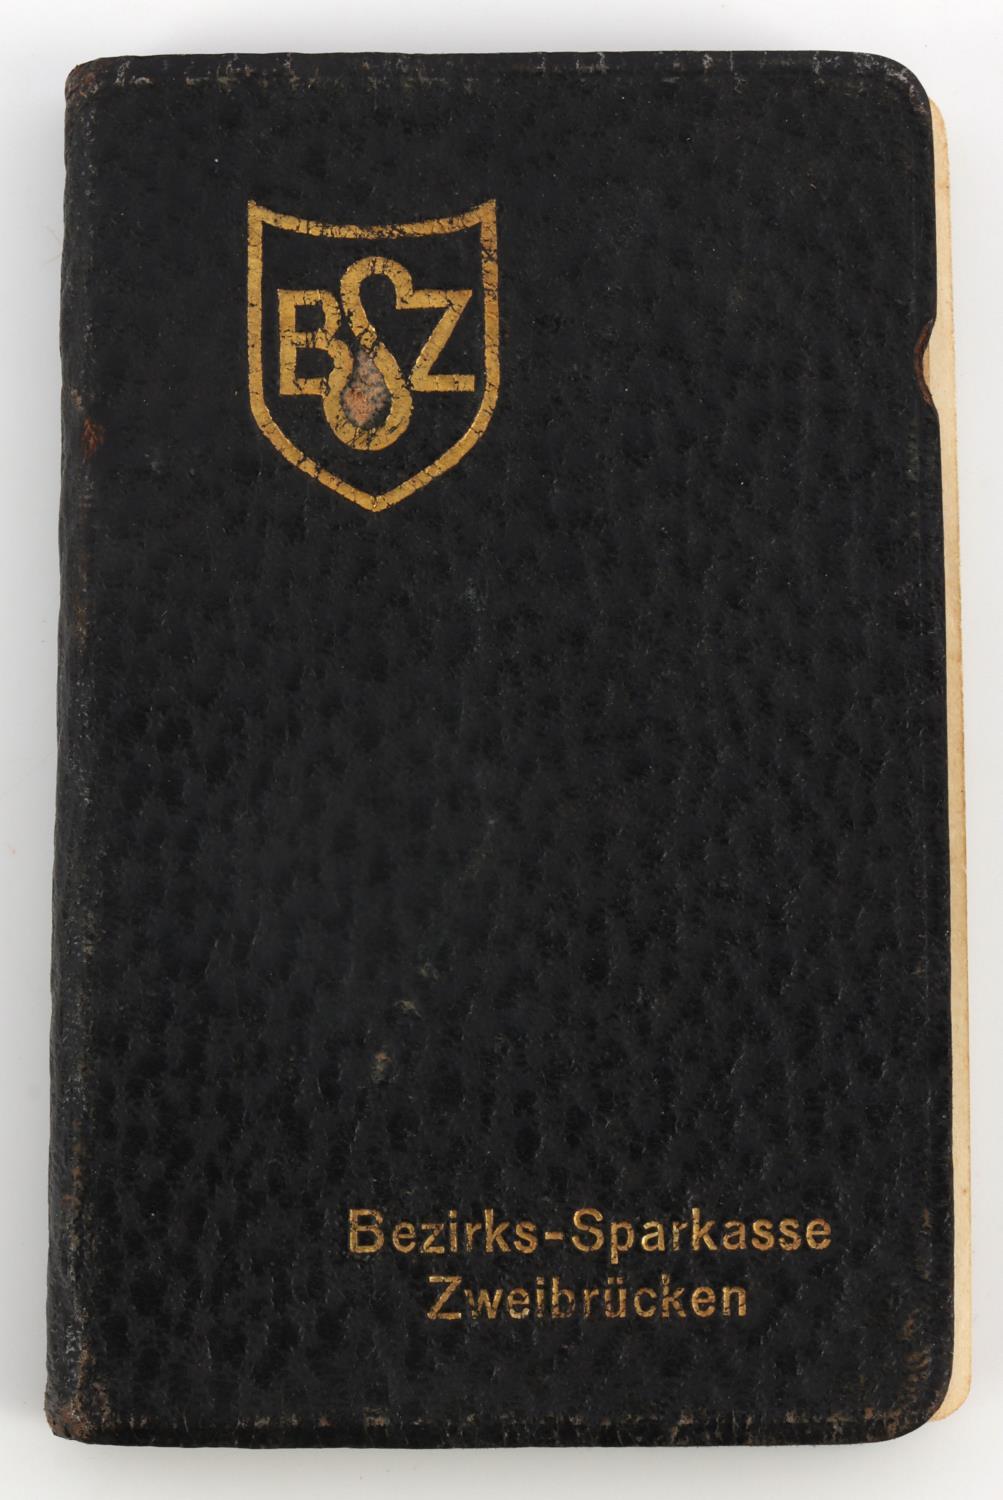 WWII GERMAN CRATE LABELS TAX BOOK & PAY SCRIPT